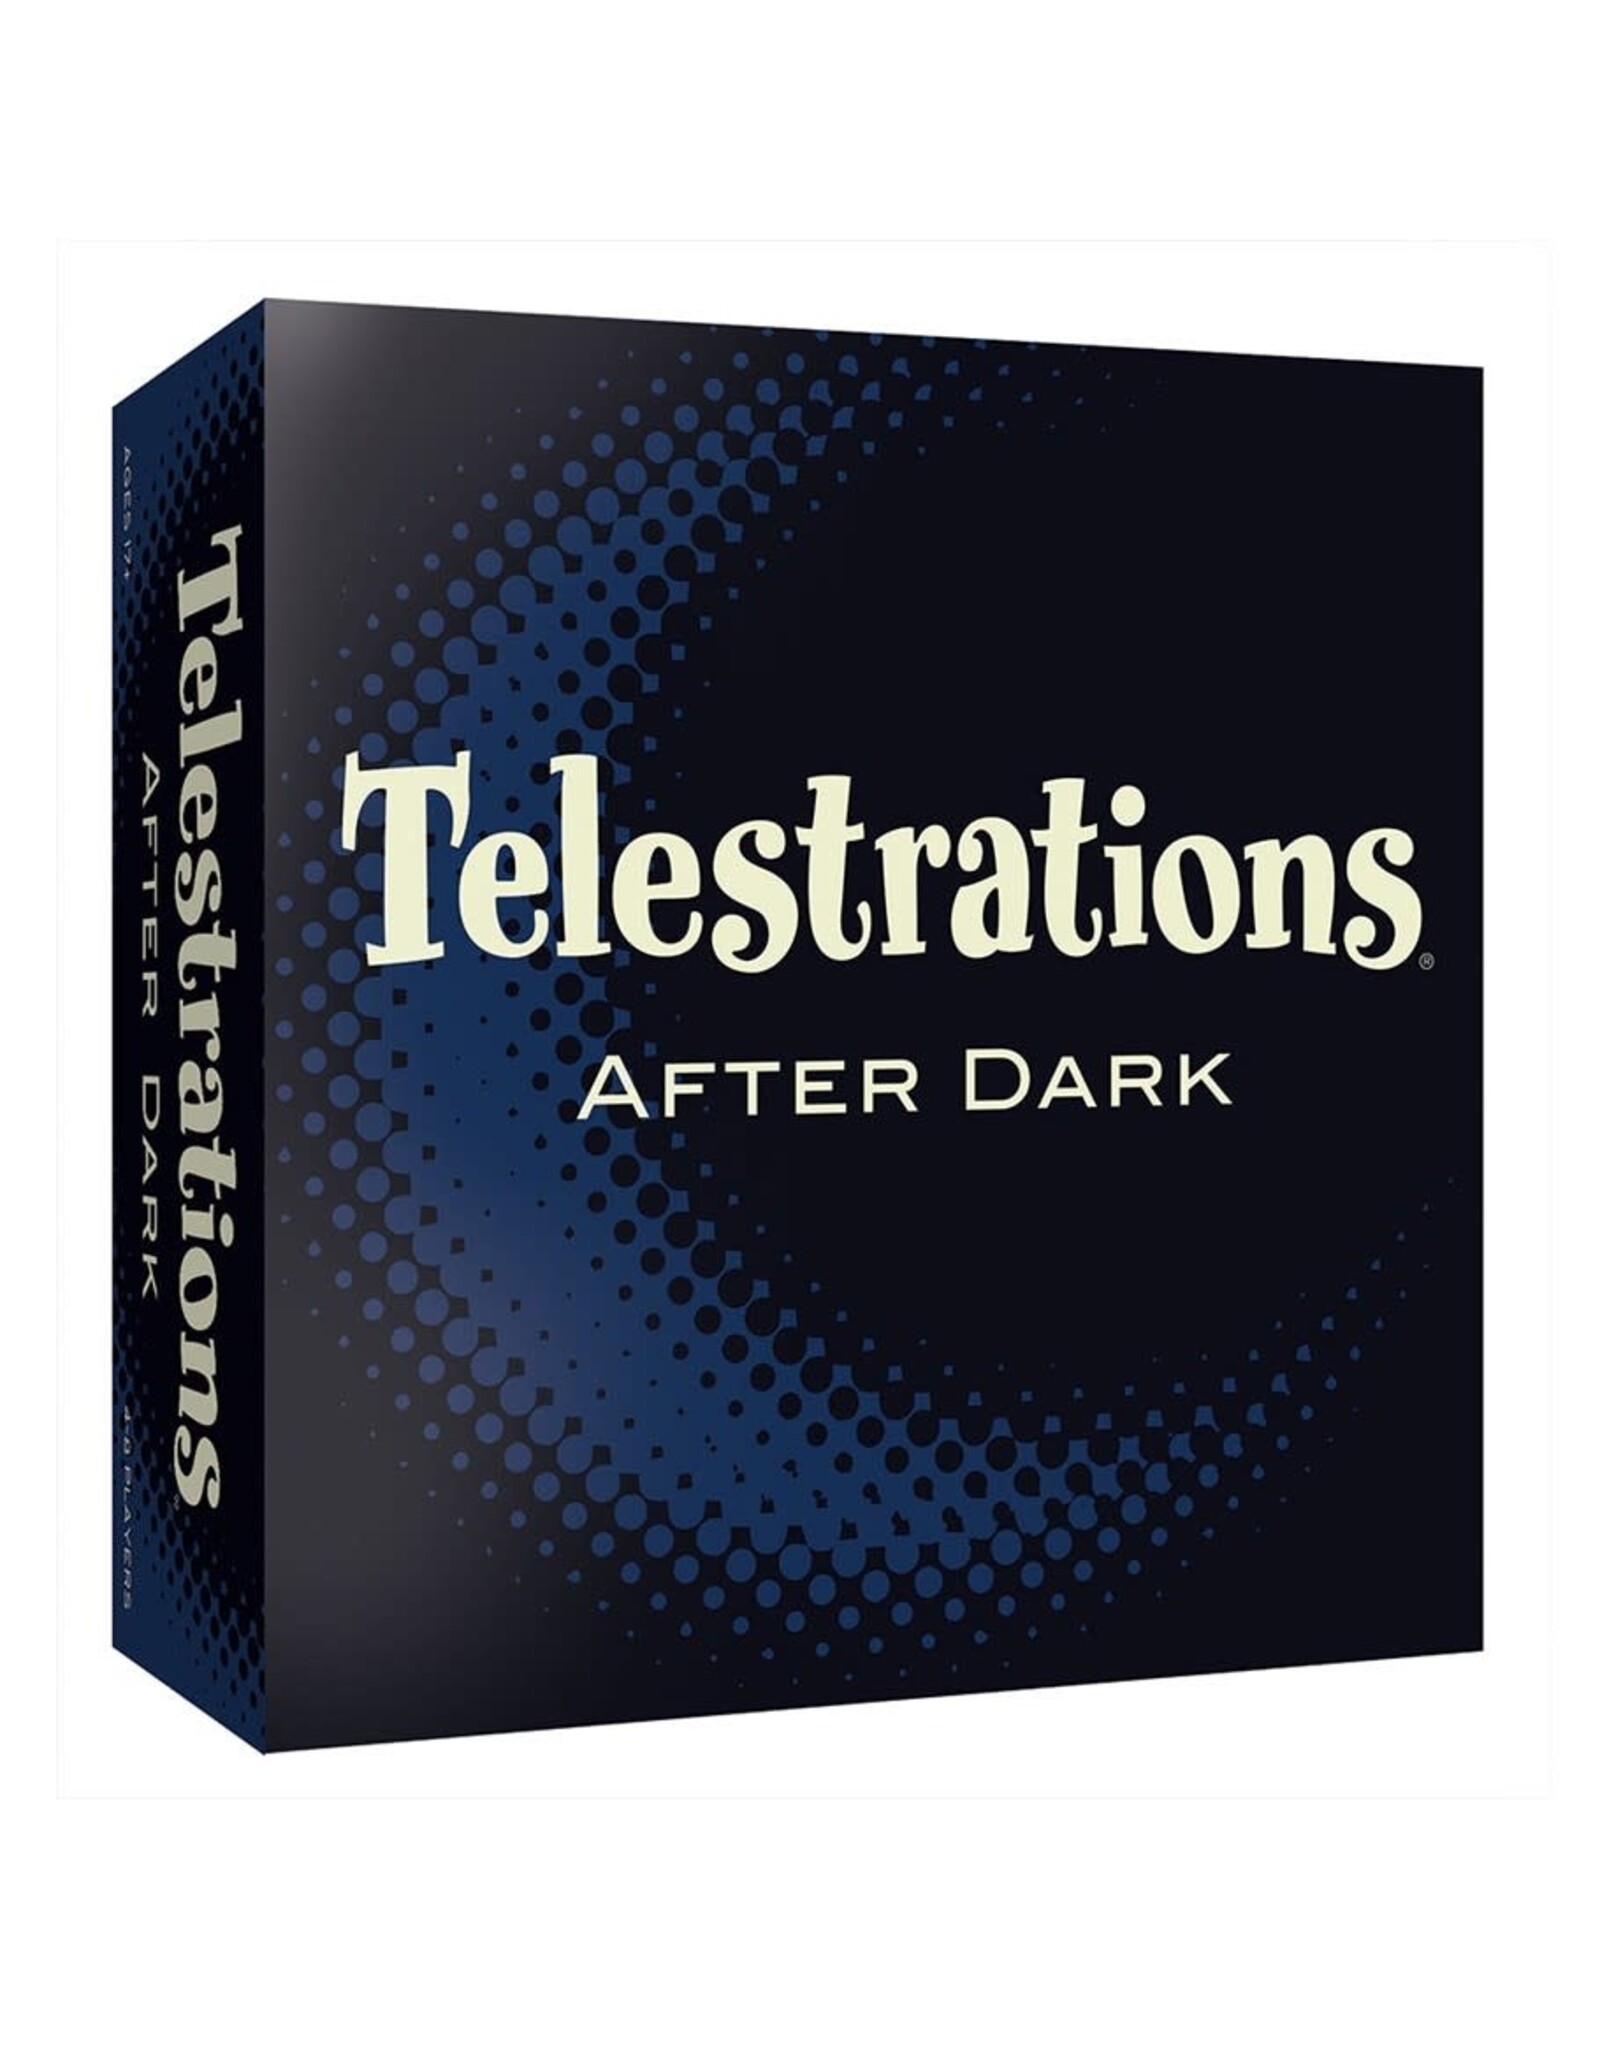 USAopoly Telestrations: After Dark